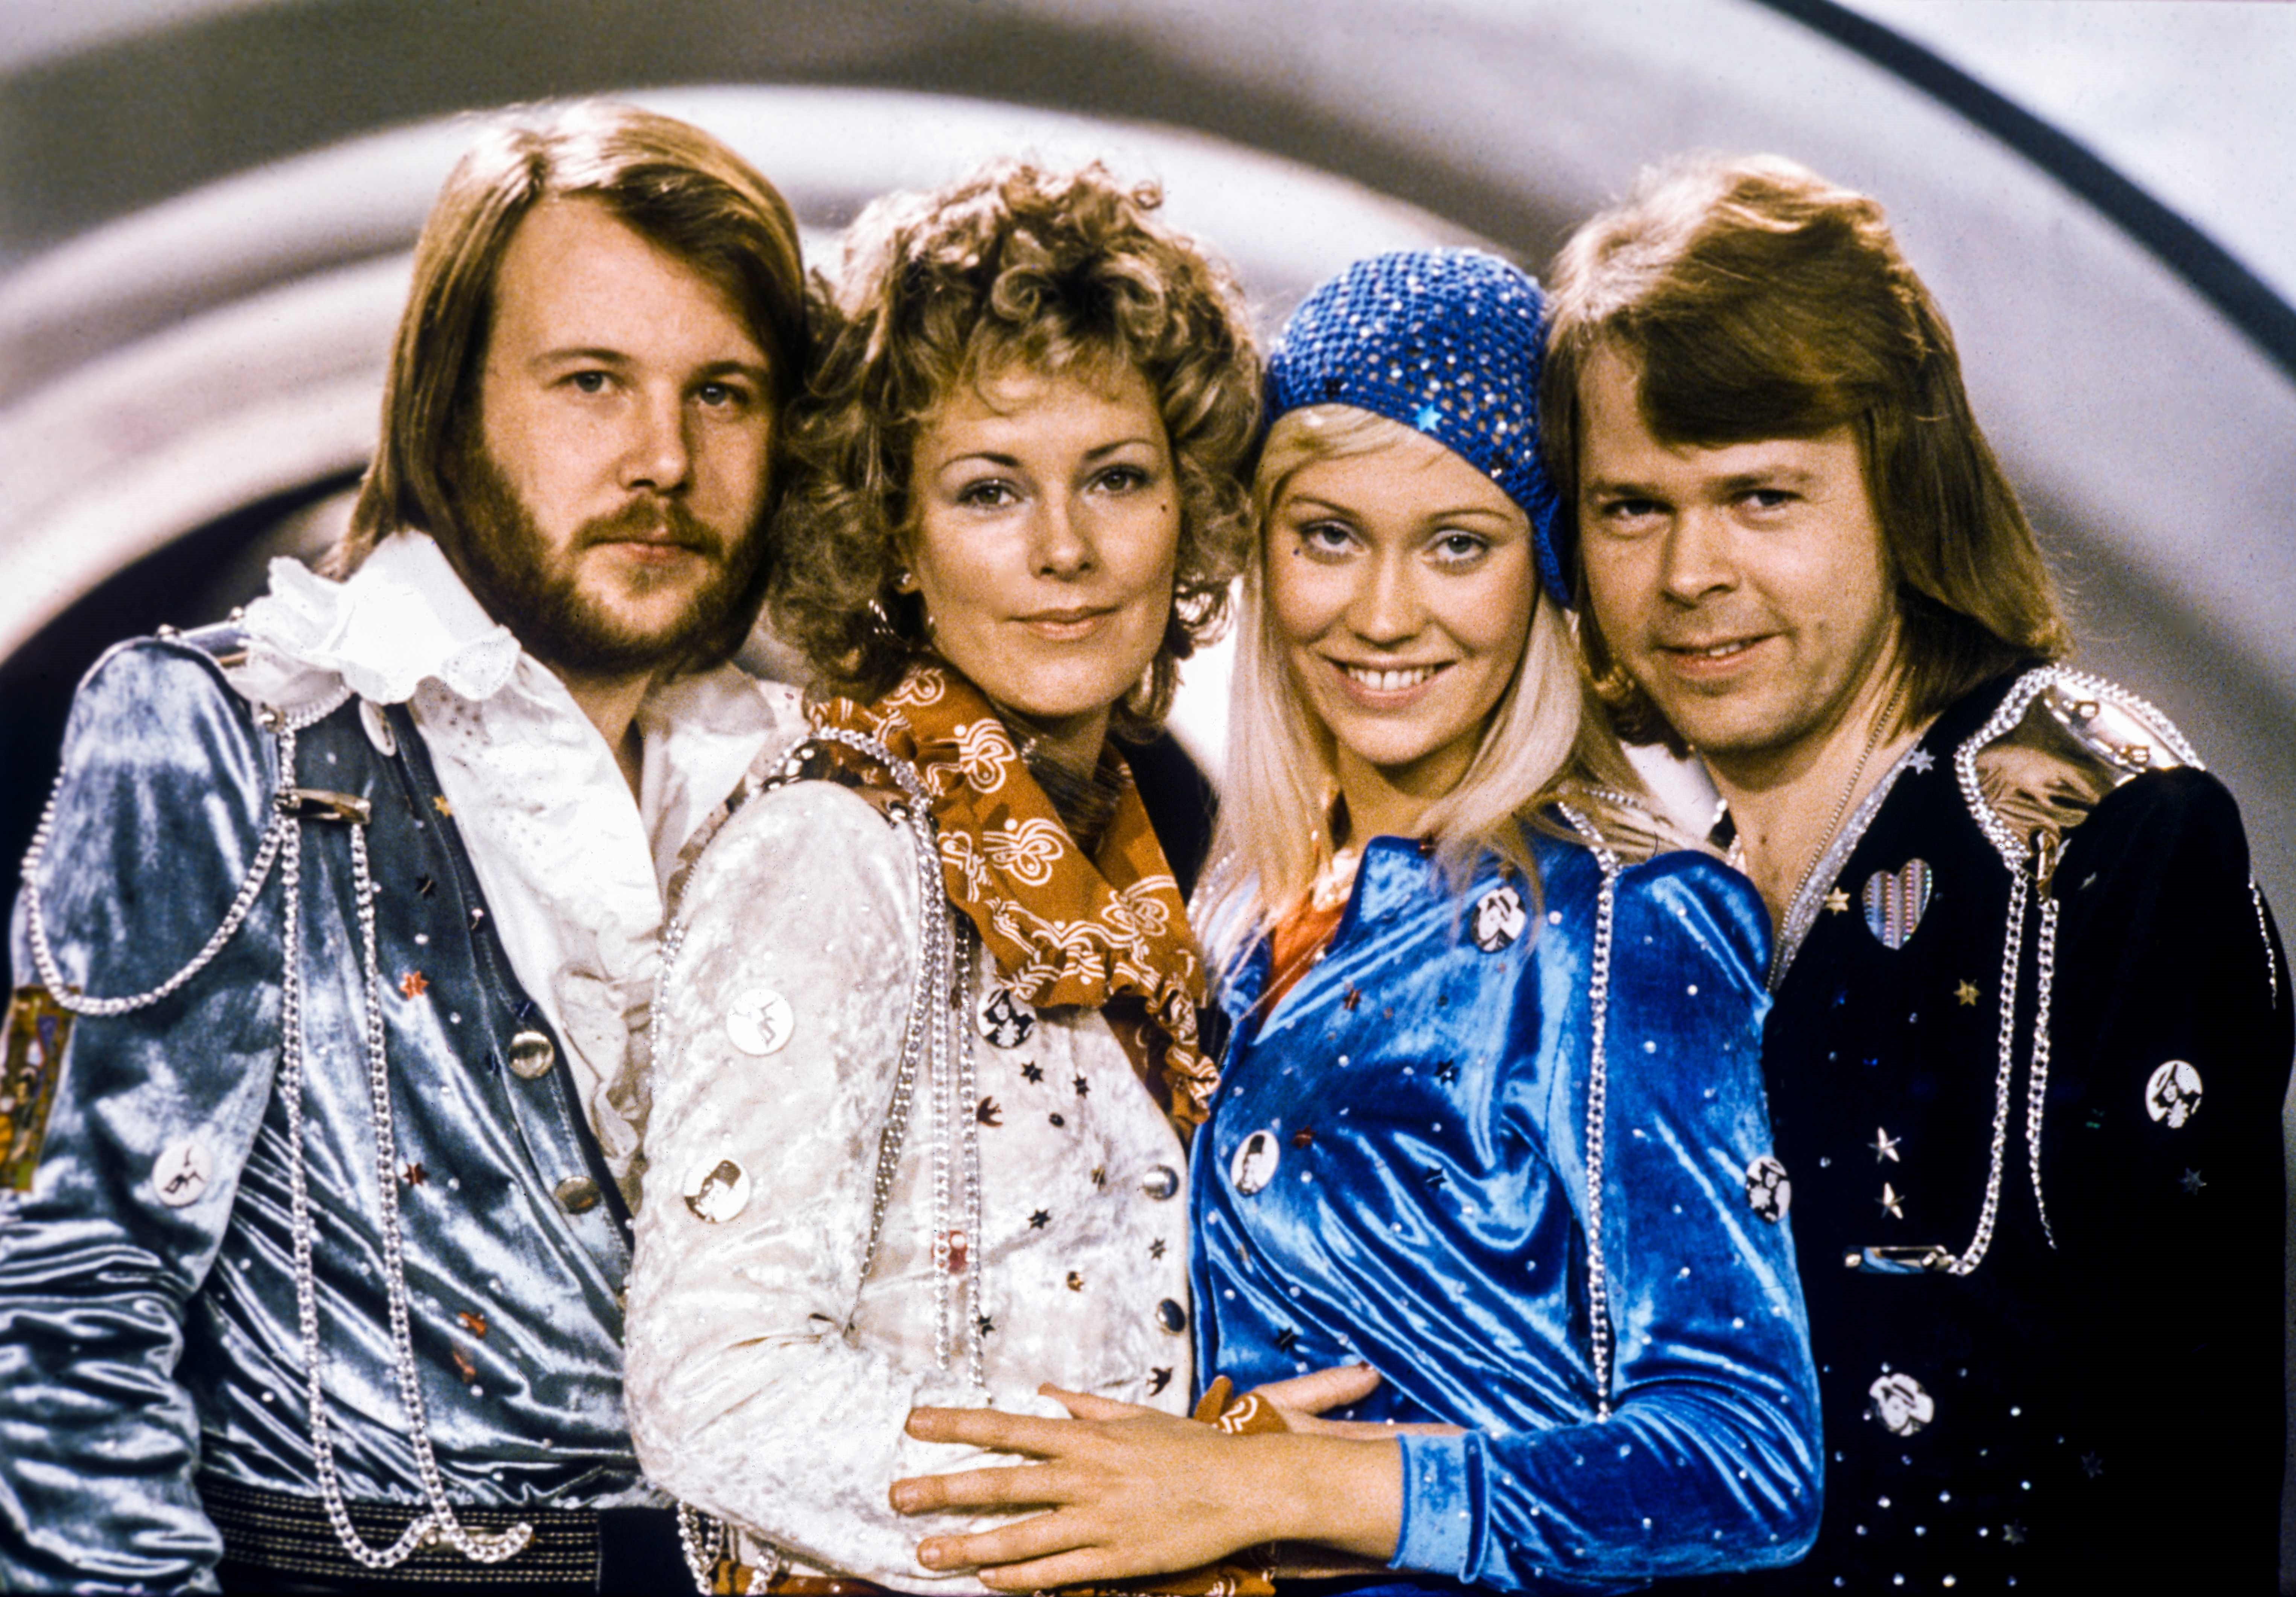 Abba really took off after their 1974 Eurovision win